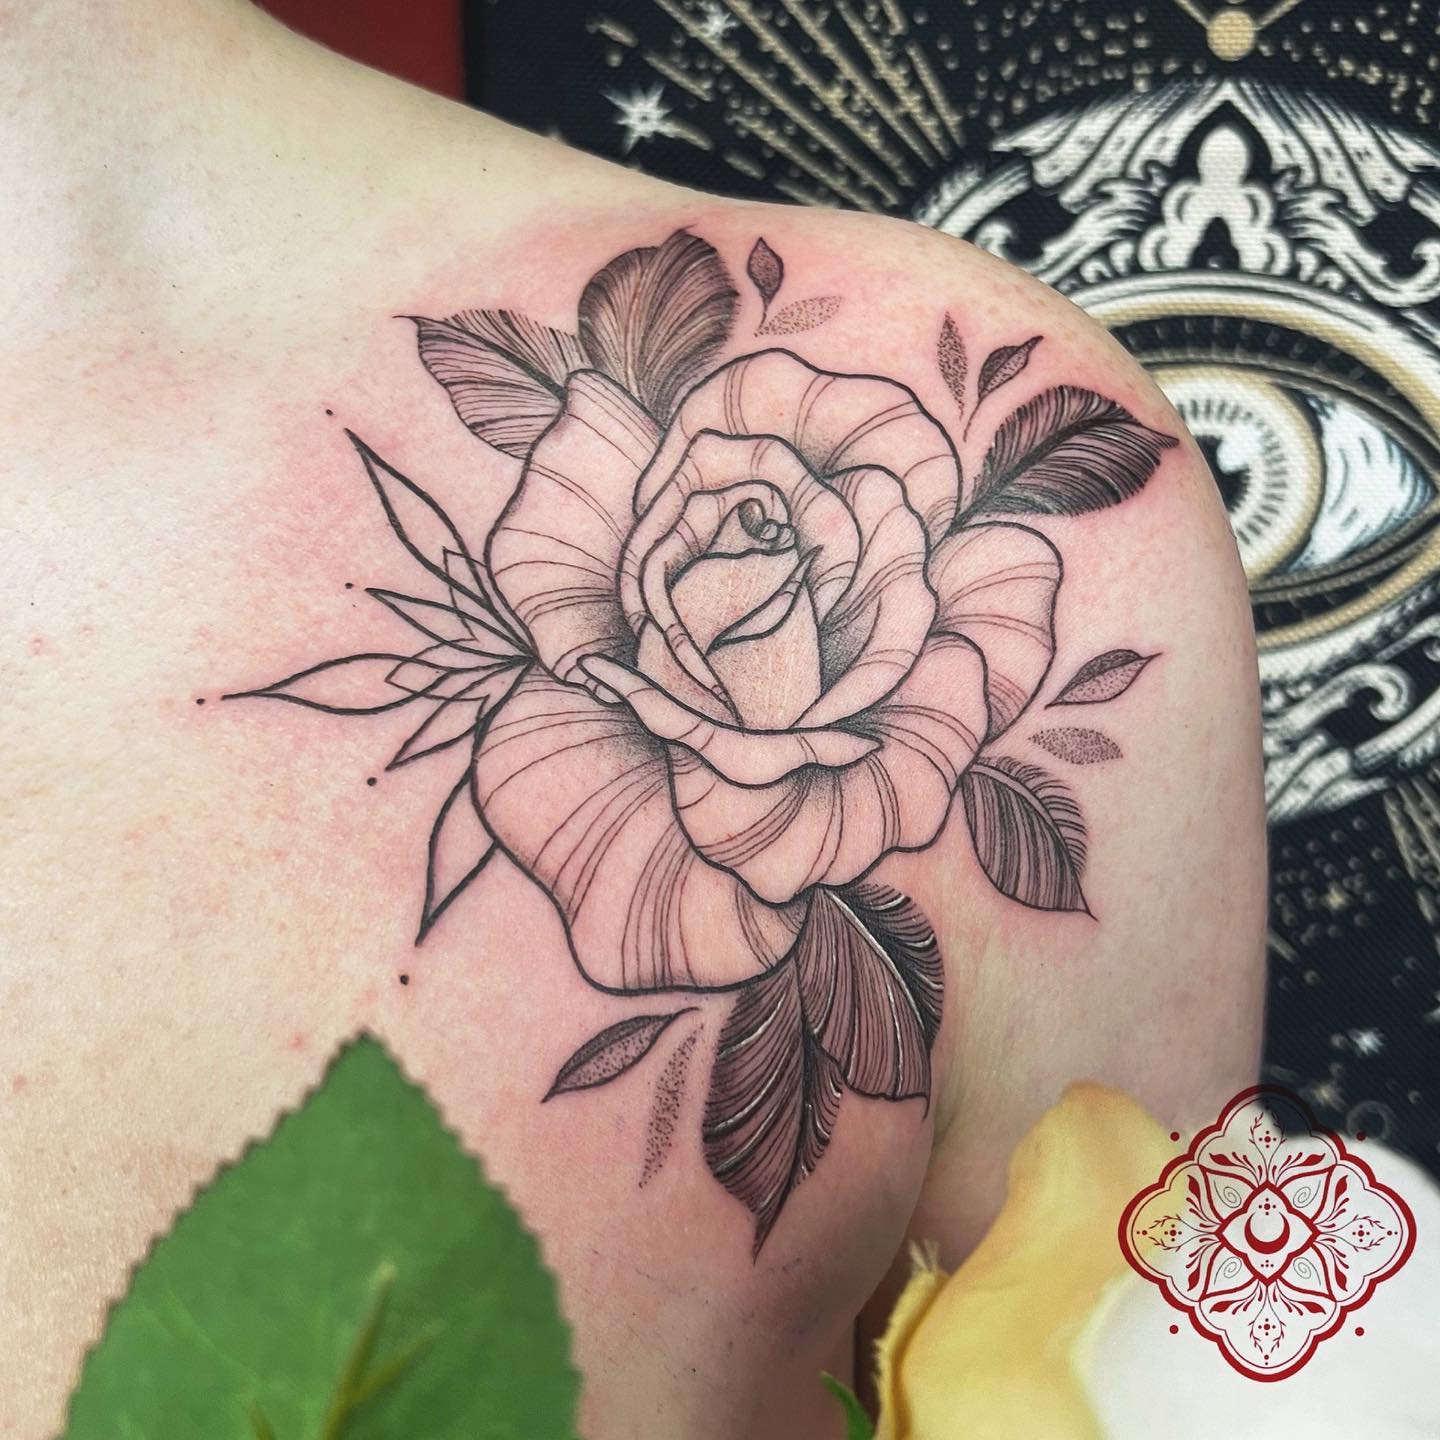 Rose Ornament 🌹 
One more for the beautiful toasht 😍

Done at studioxiiigallery 
•
•
•
•
•
•
•
•
  
             
  